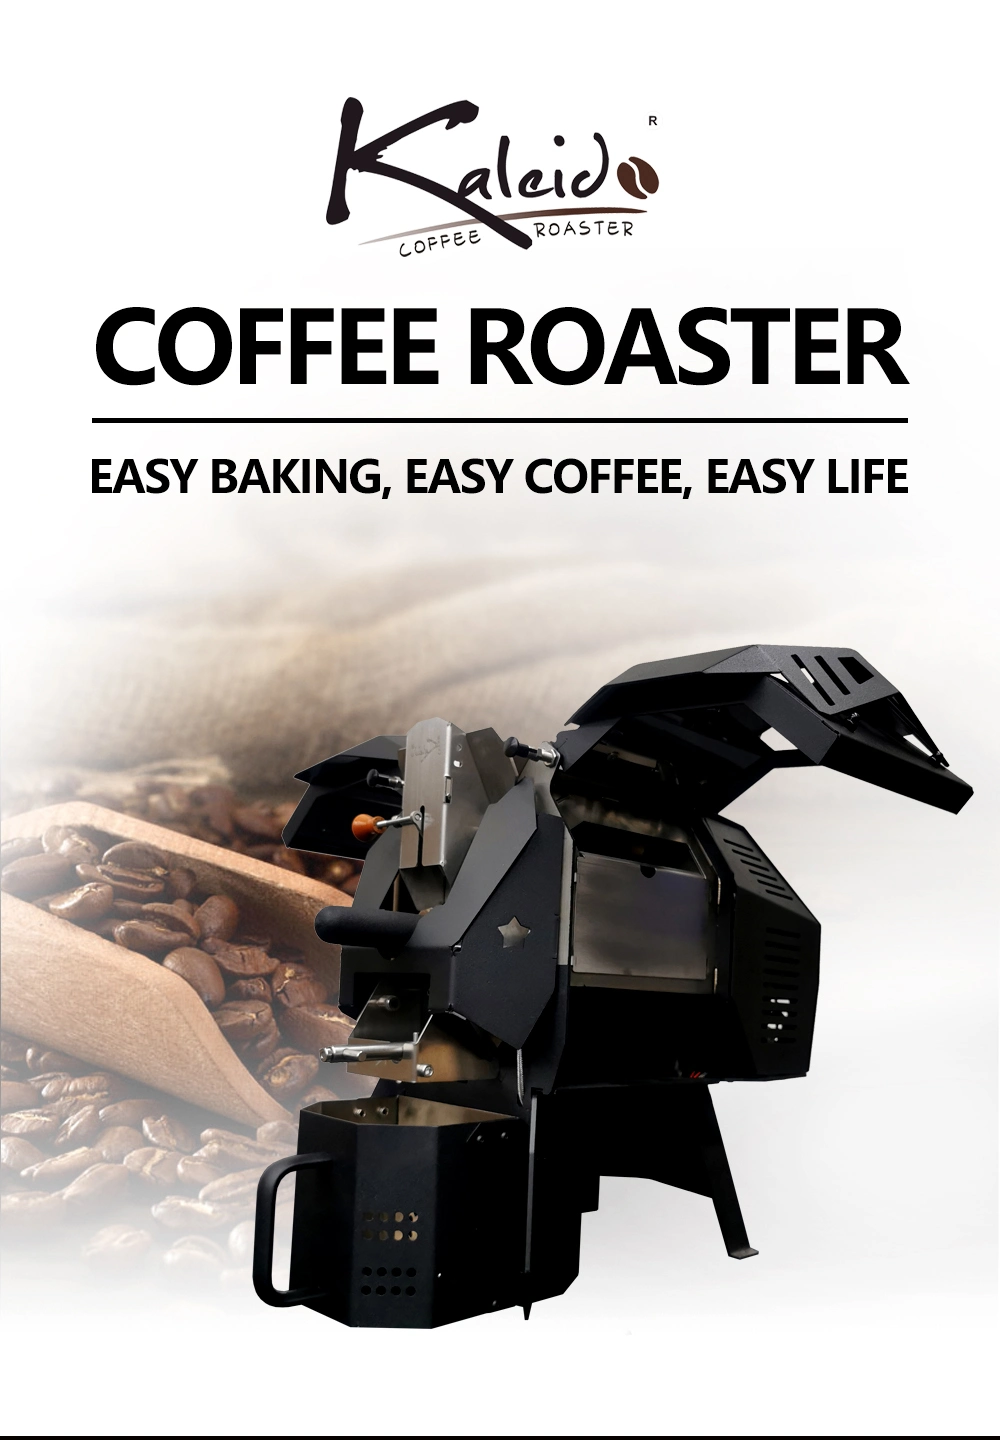 400g Coffee Roaster Machine Non-Stick Coffee Bean Roaster for Home Use 110-220 V